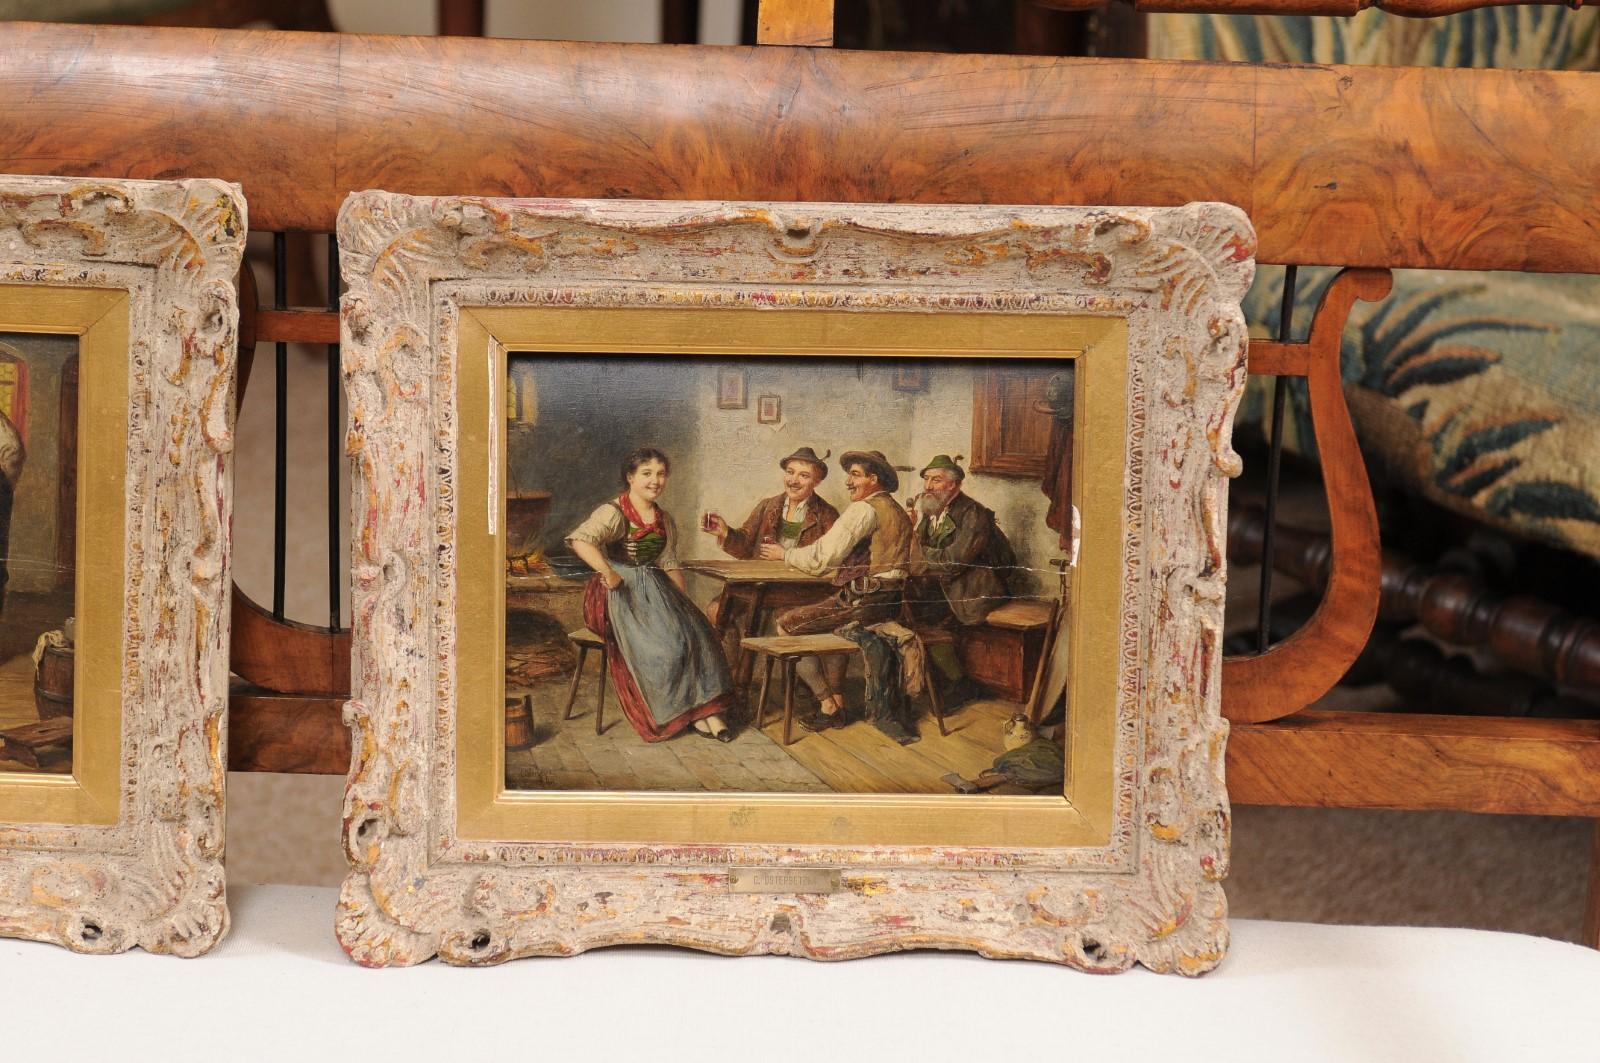 20th Century Pair of Oil Paintings of Tavern Scenes, Signed & Dated “C. Ostersetzer, 1903